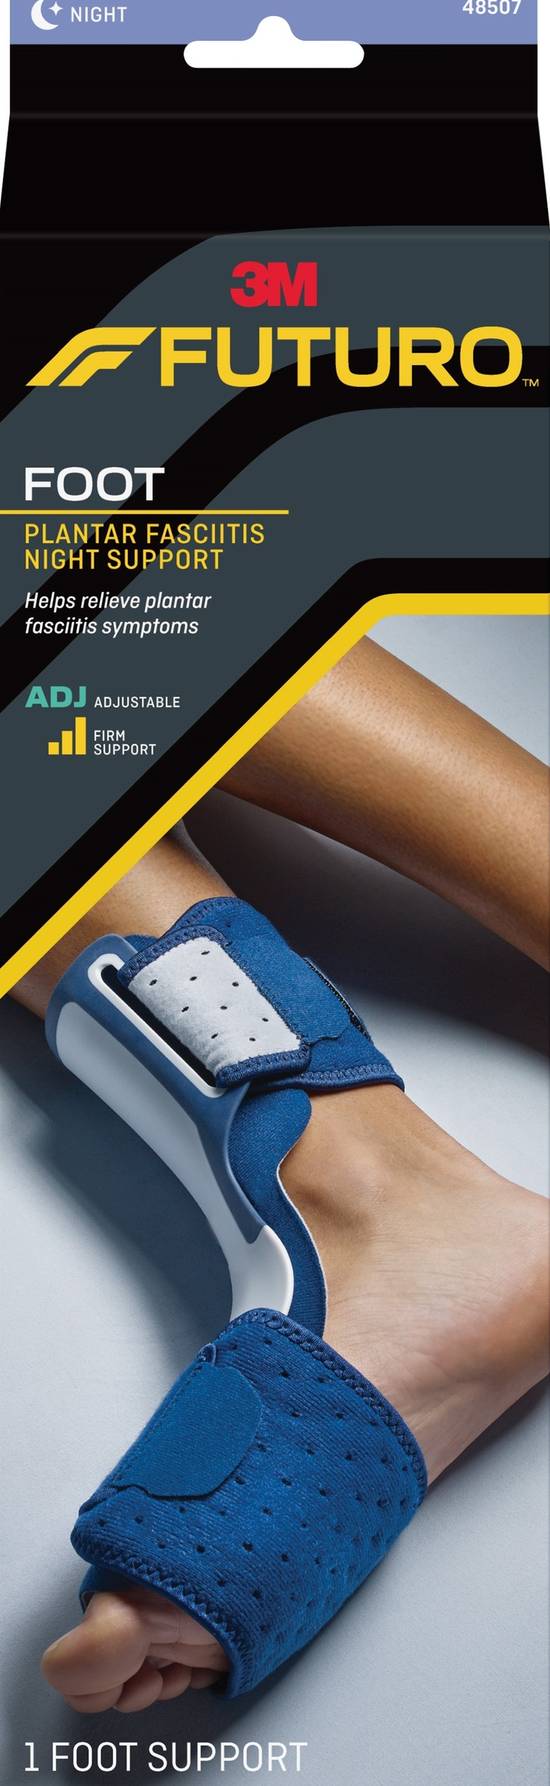 Futuro Plantar Fasciitis Night Support Adjustable 3m, Delivery Near You